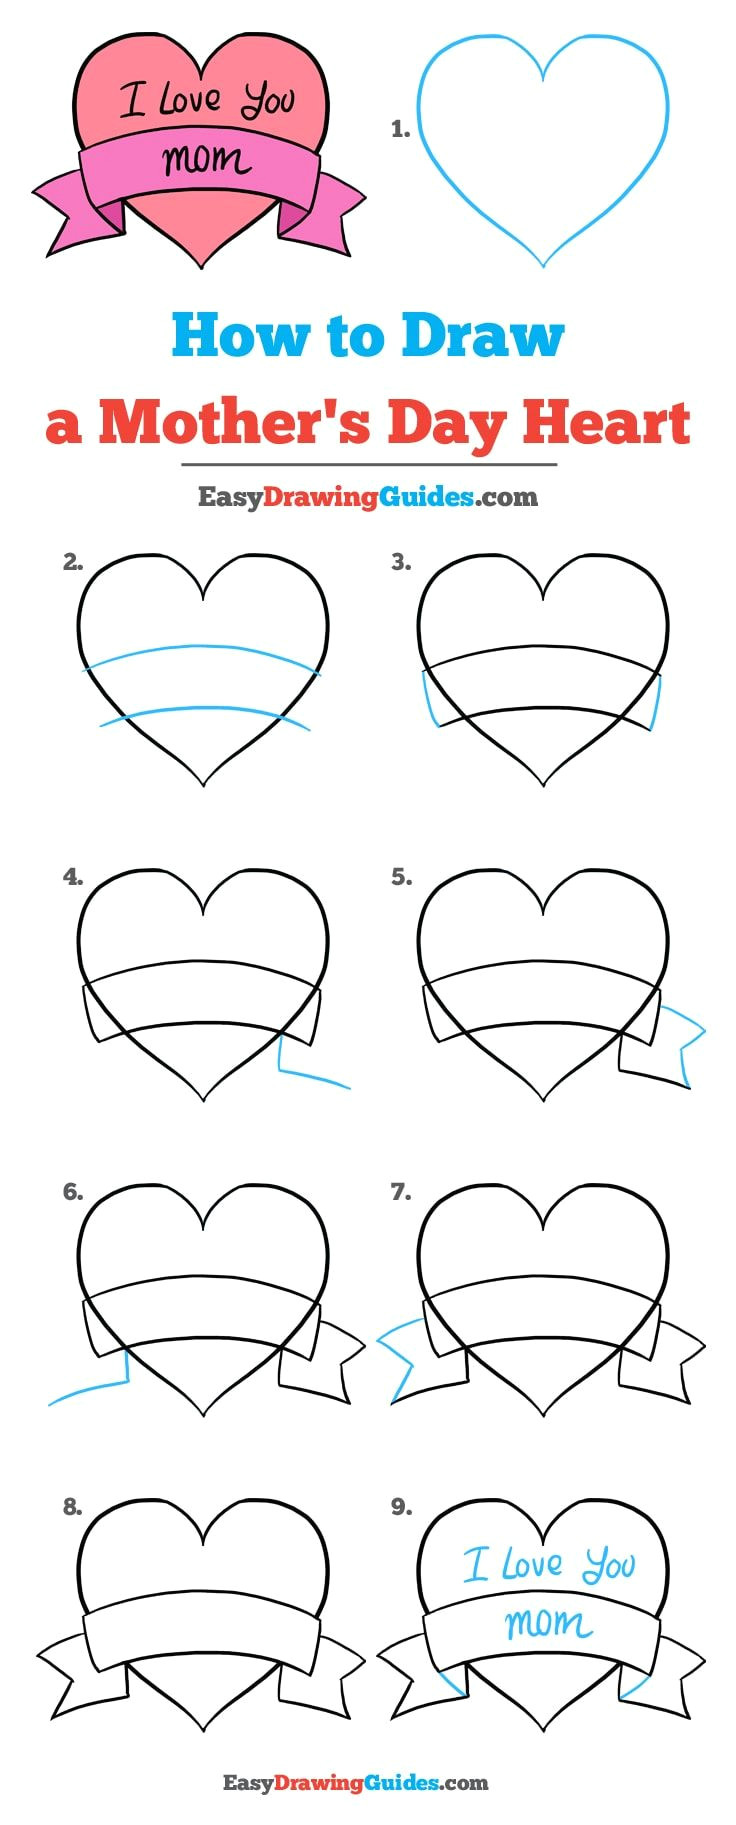 Easy Drawings Romantic How to Draw A Mother S Day Heart Really Easy Drawing Tutorial